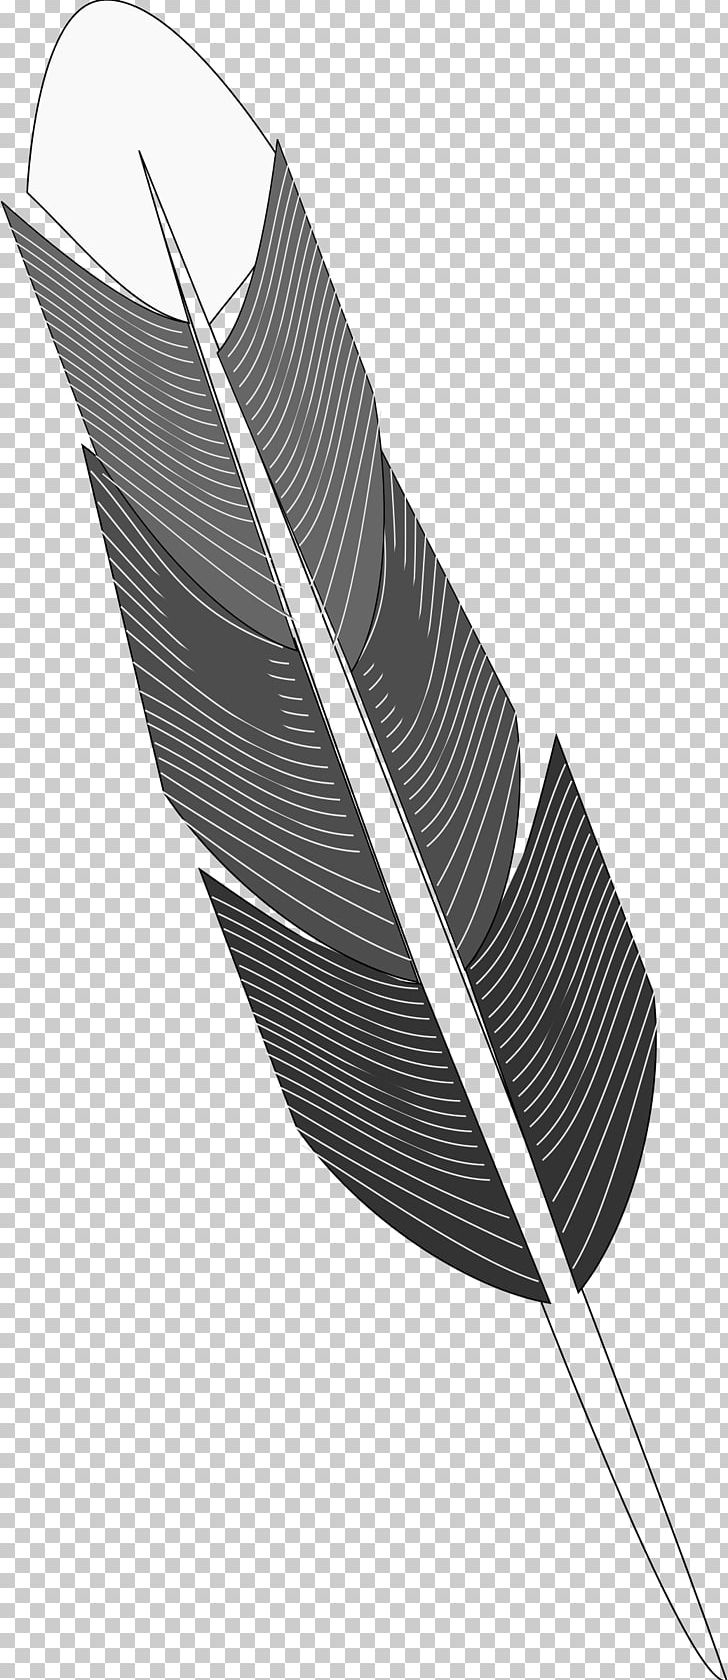 Bird Feather Drawing PNG, Clipart, Animals, Bird, Black And White ...